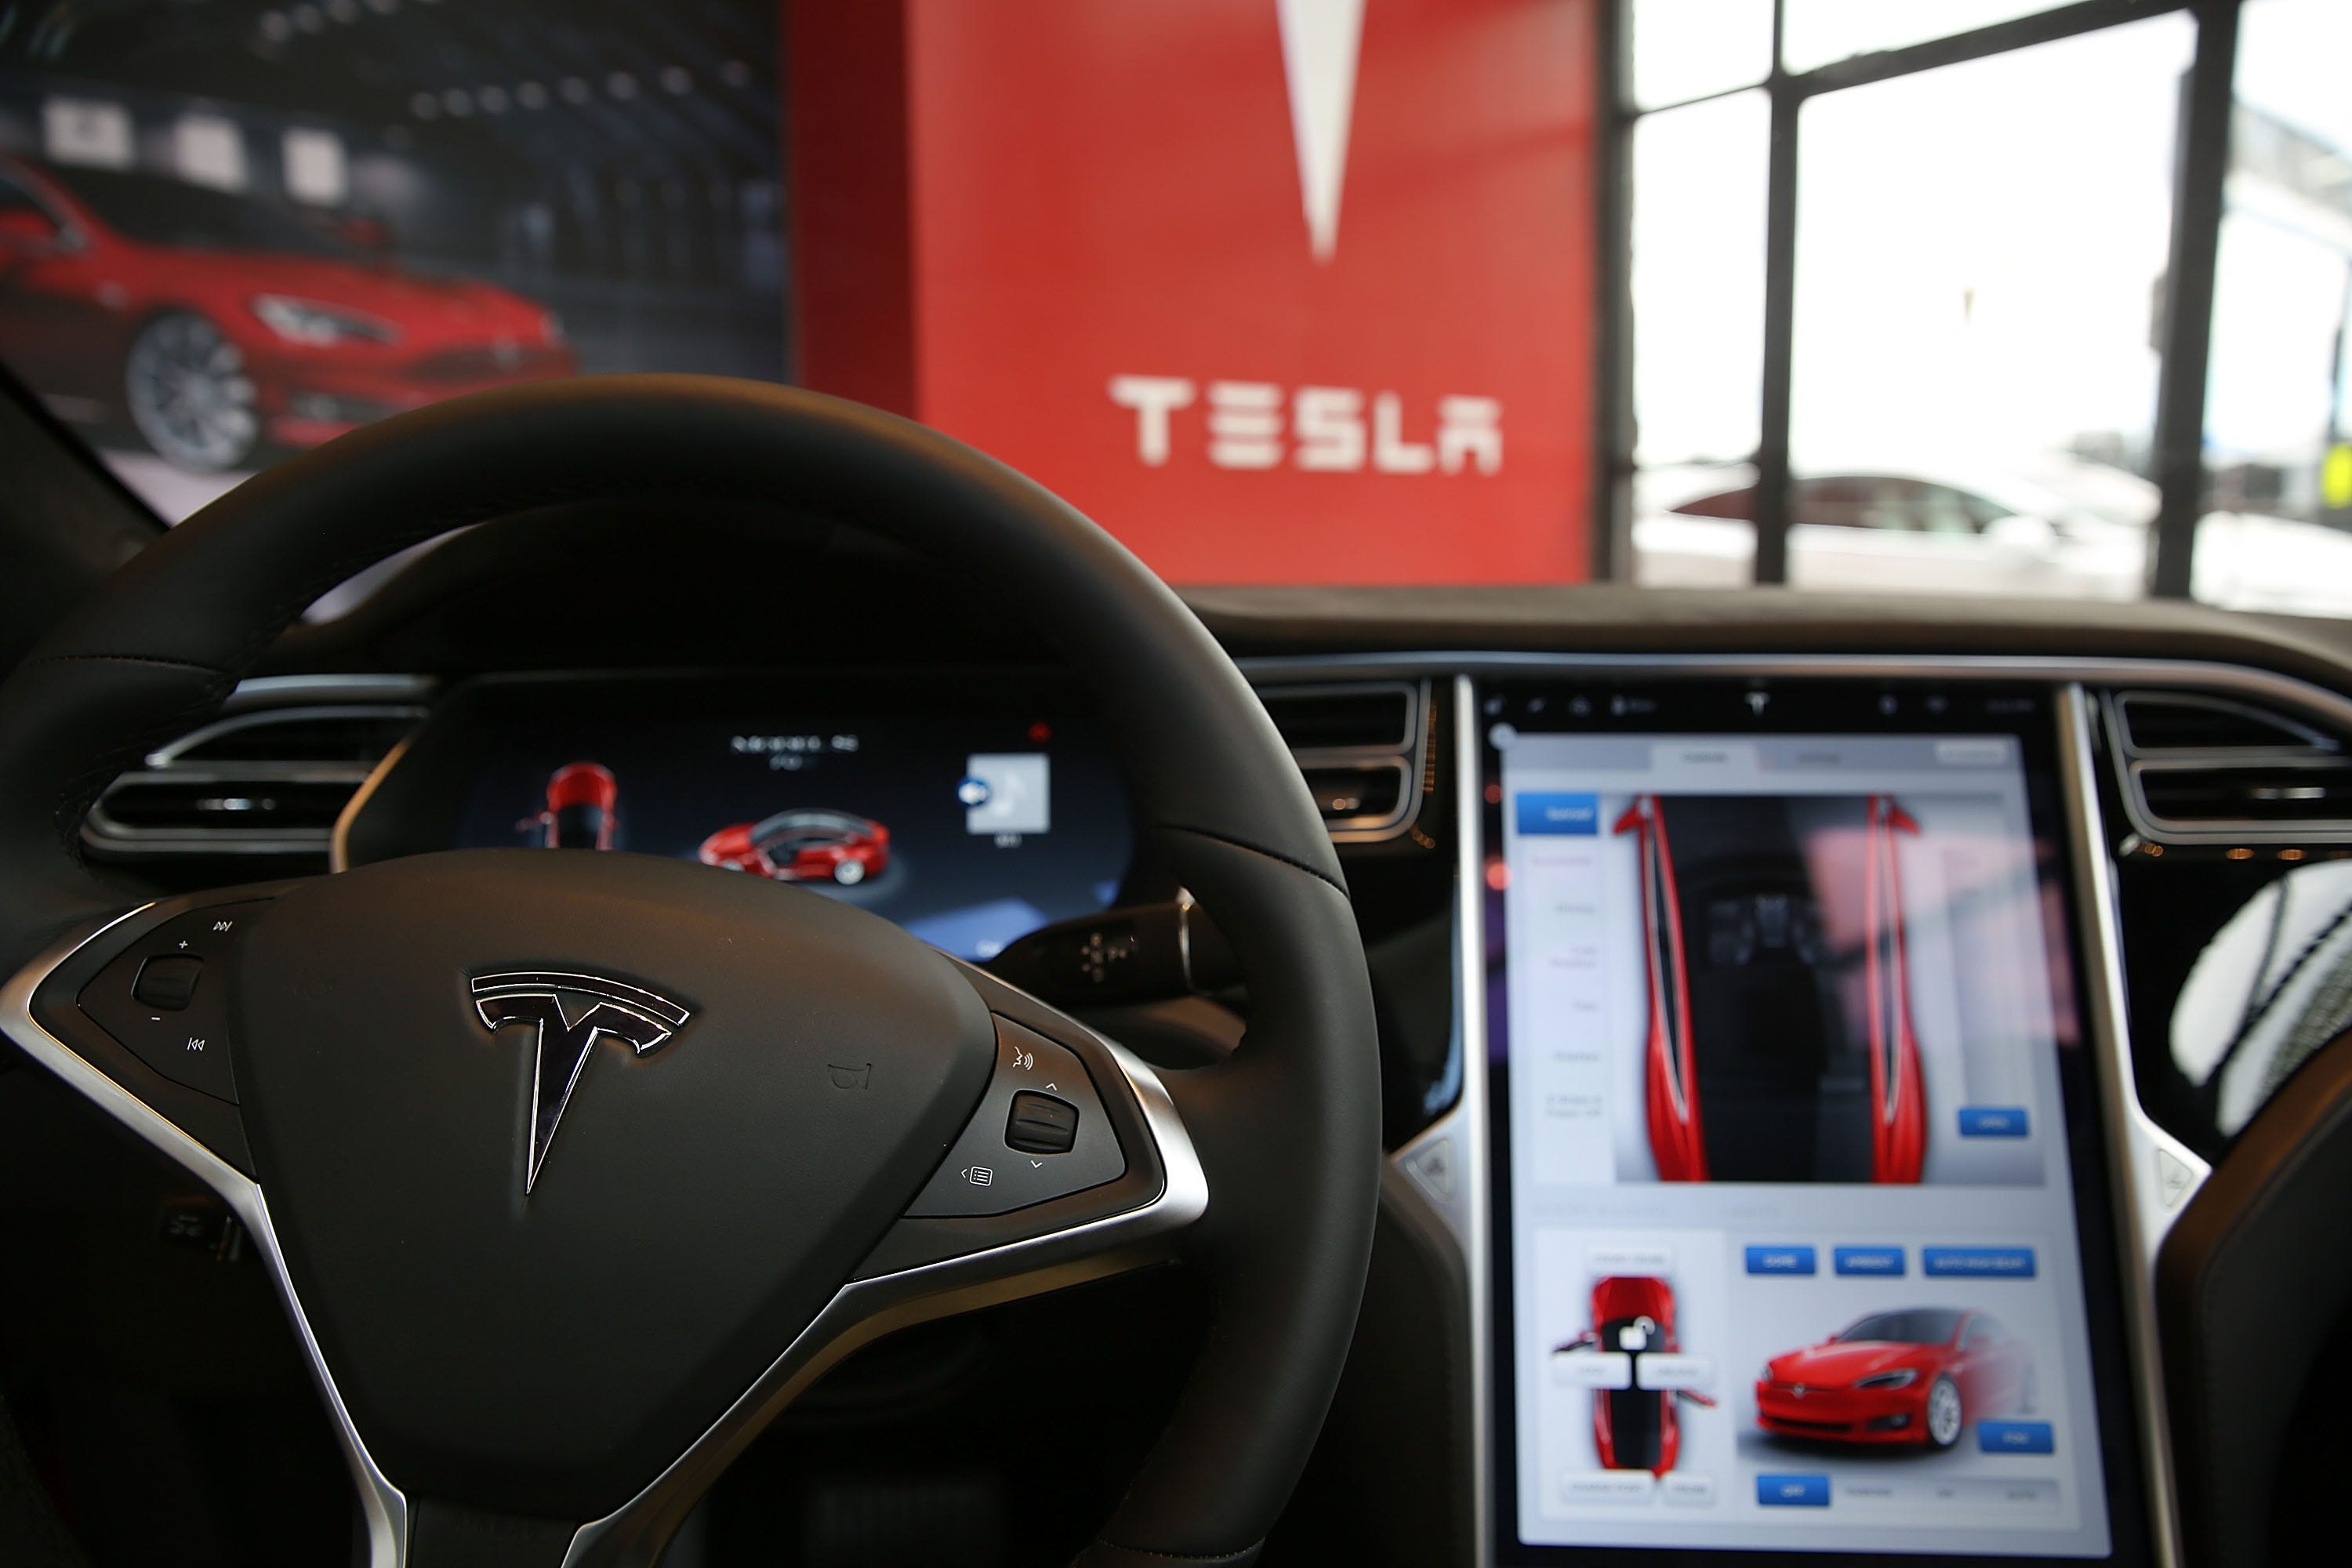 disobey tesla at your own risk: woman tries to update vehicle while inside as temp hits 115